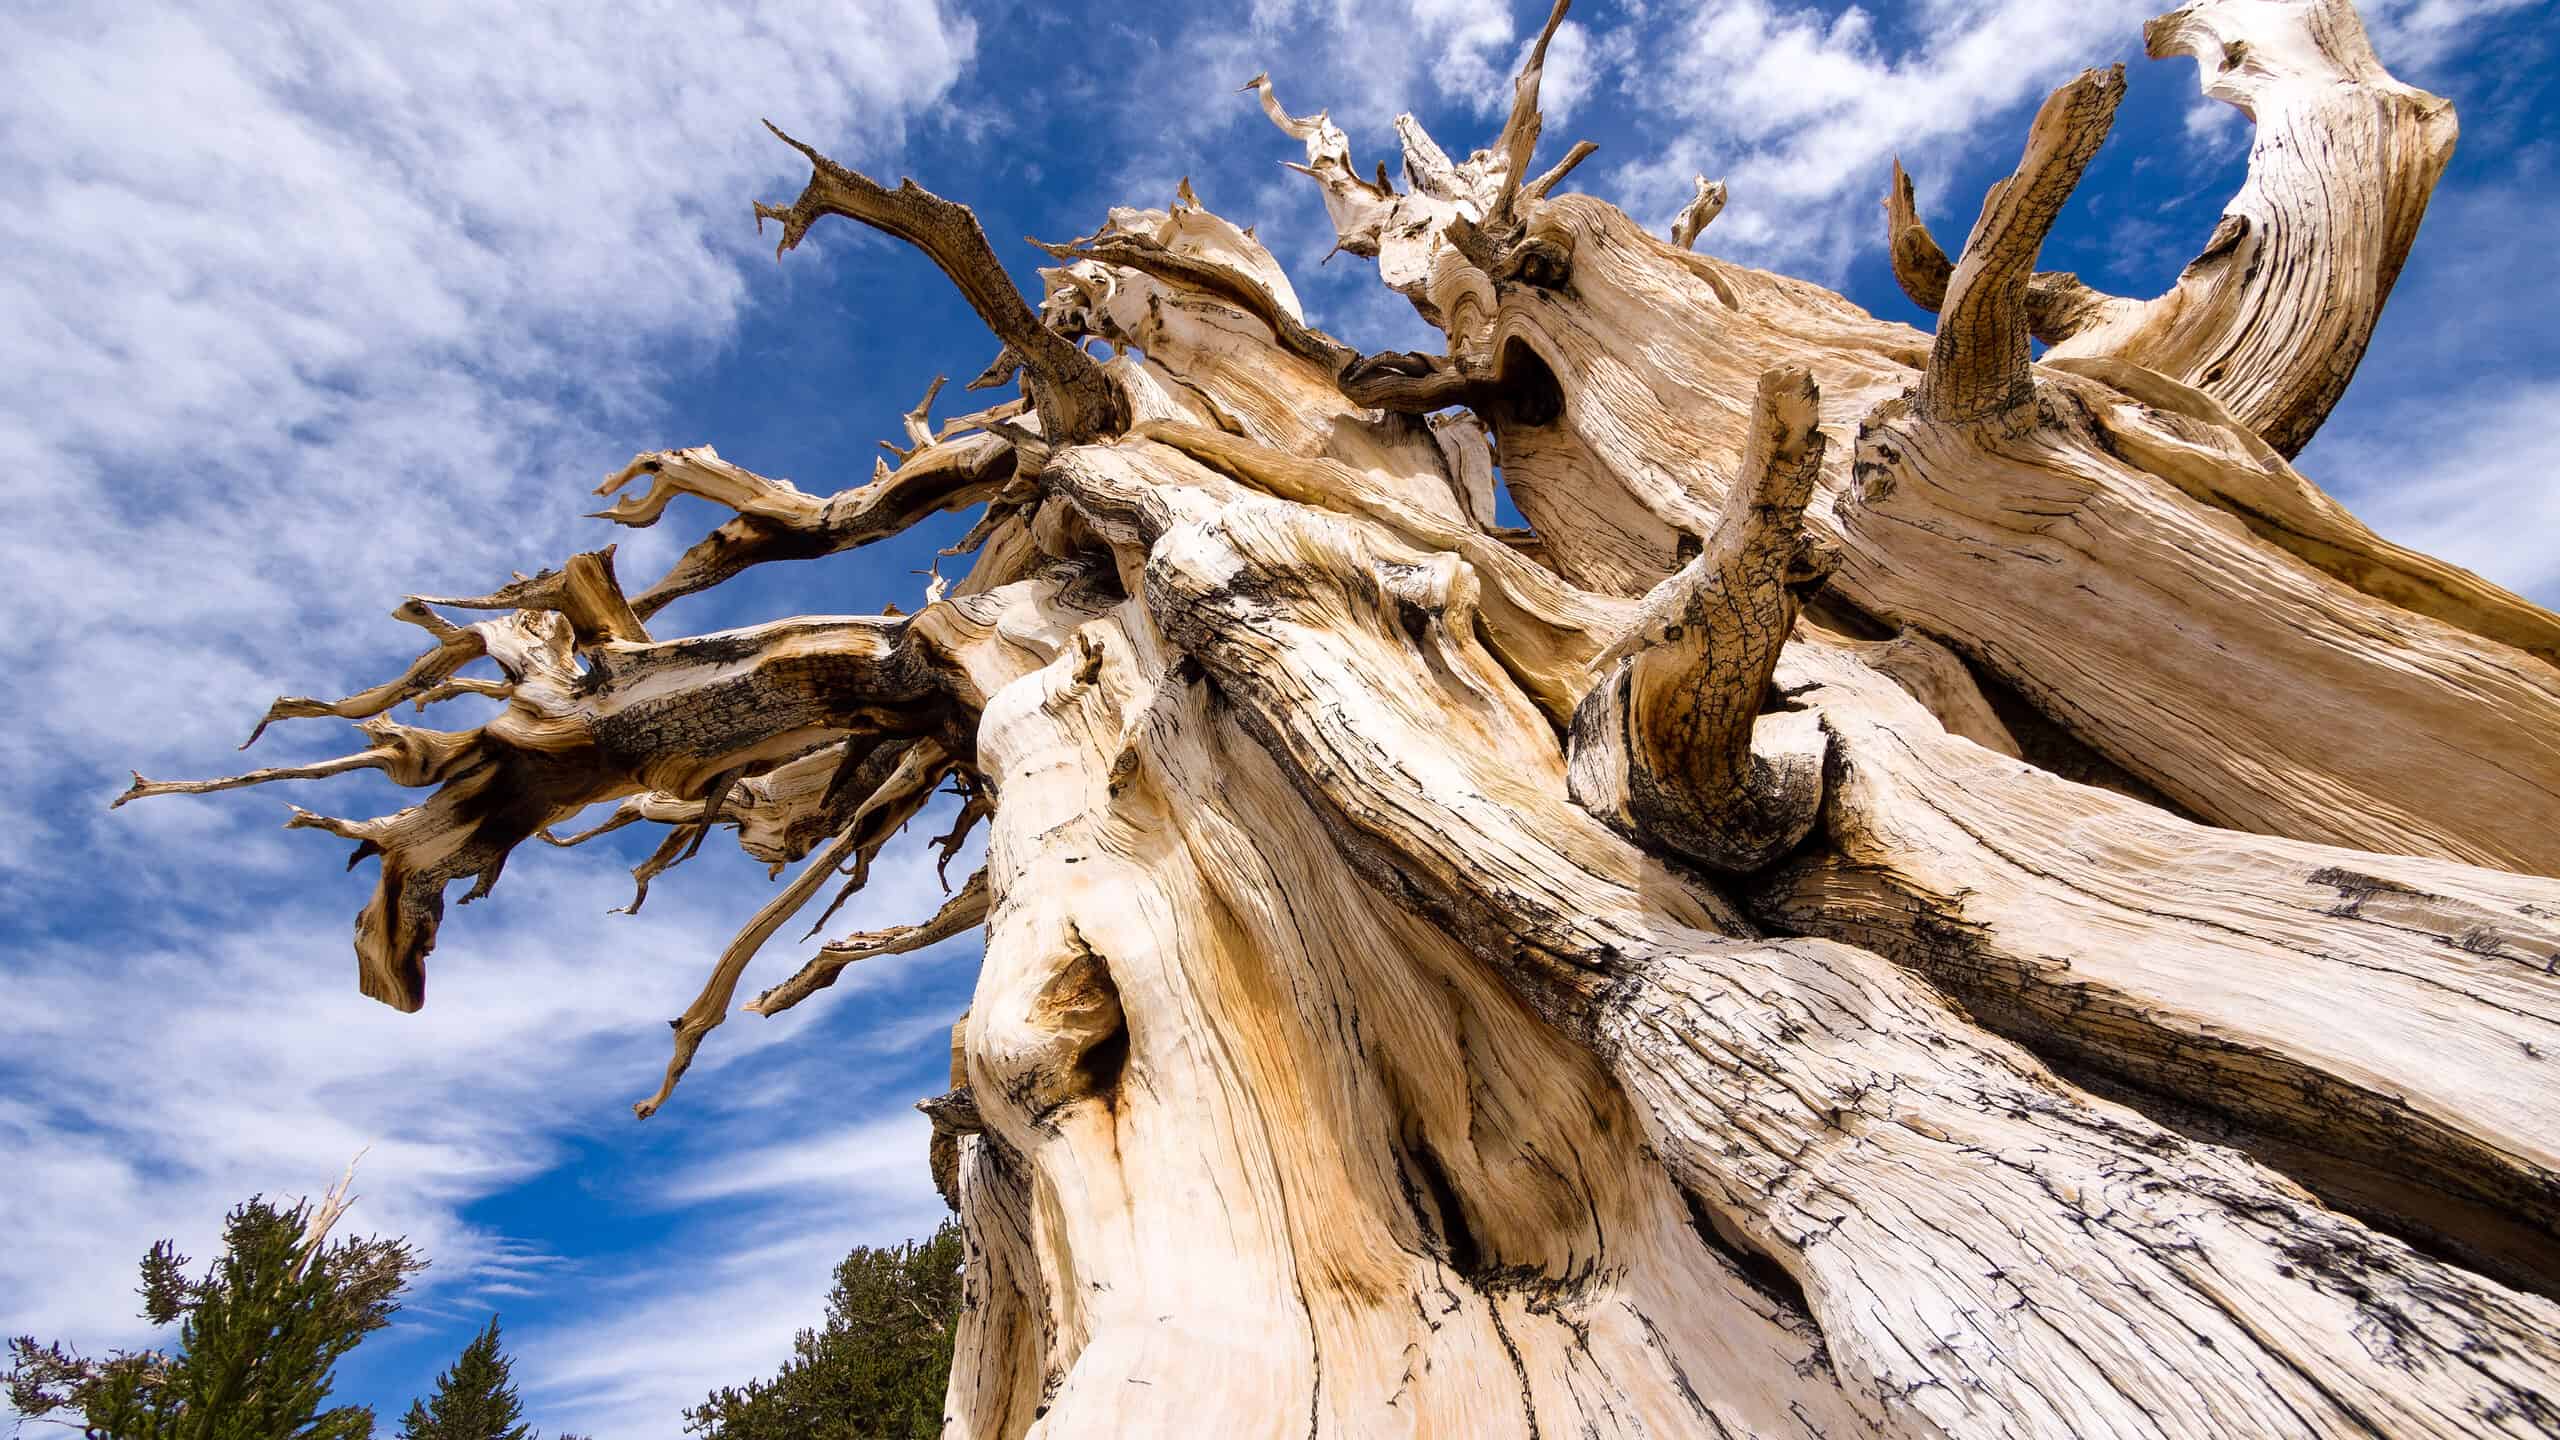 The Bristlecone pines of the Great Basin National Park are the oldest trees in the world.